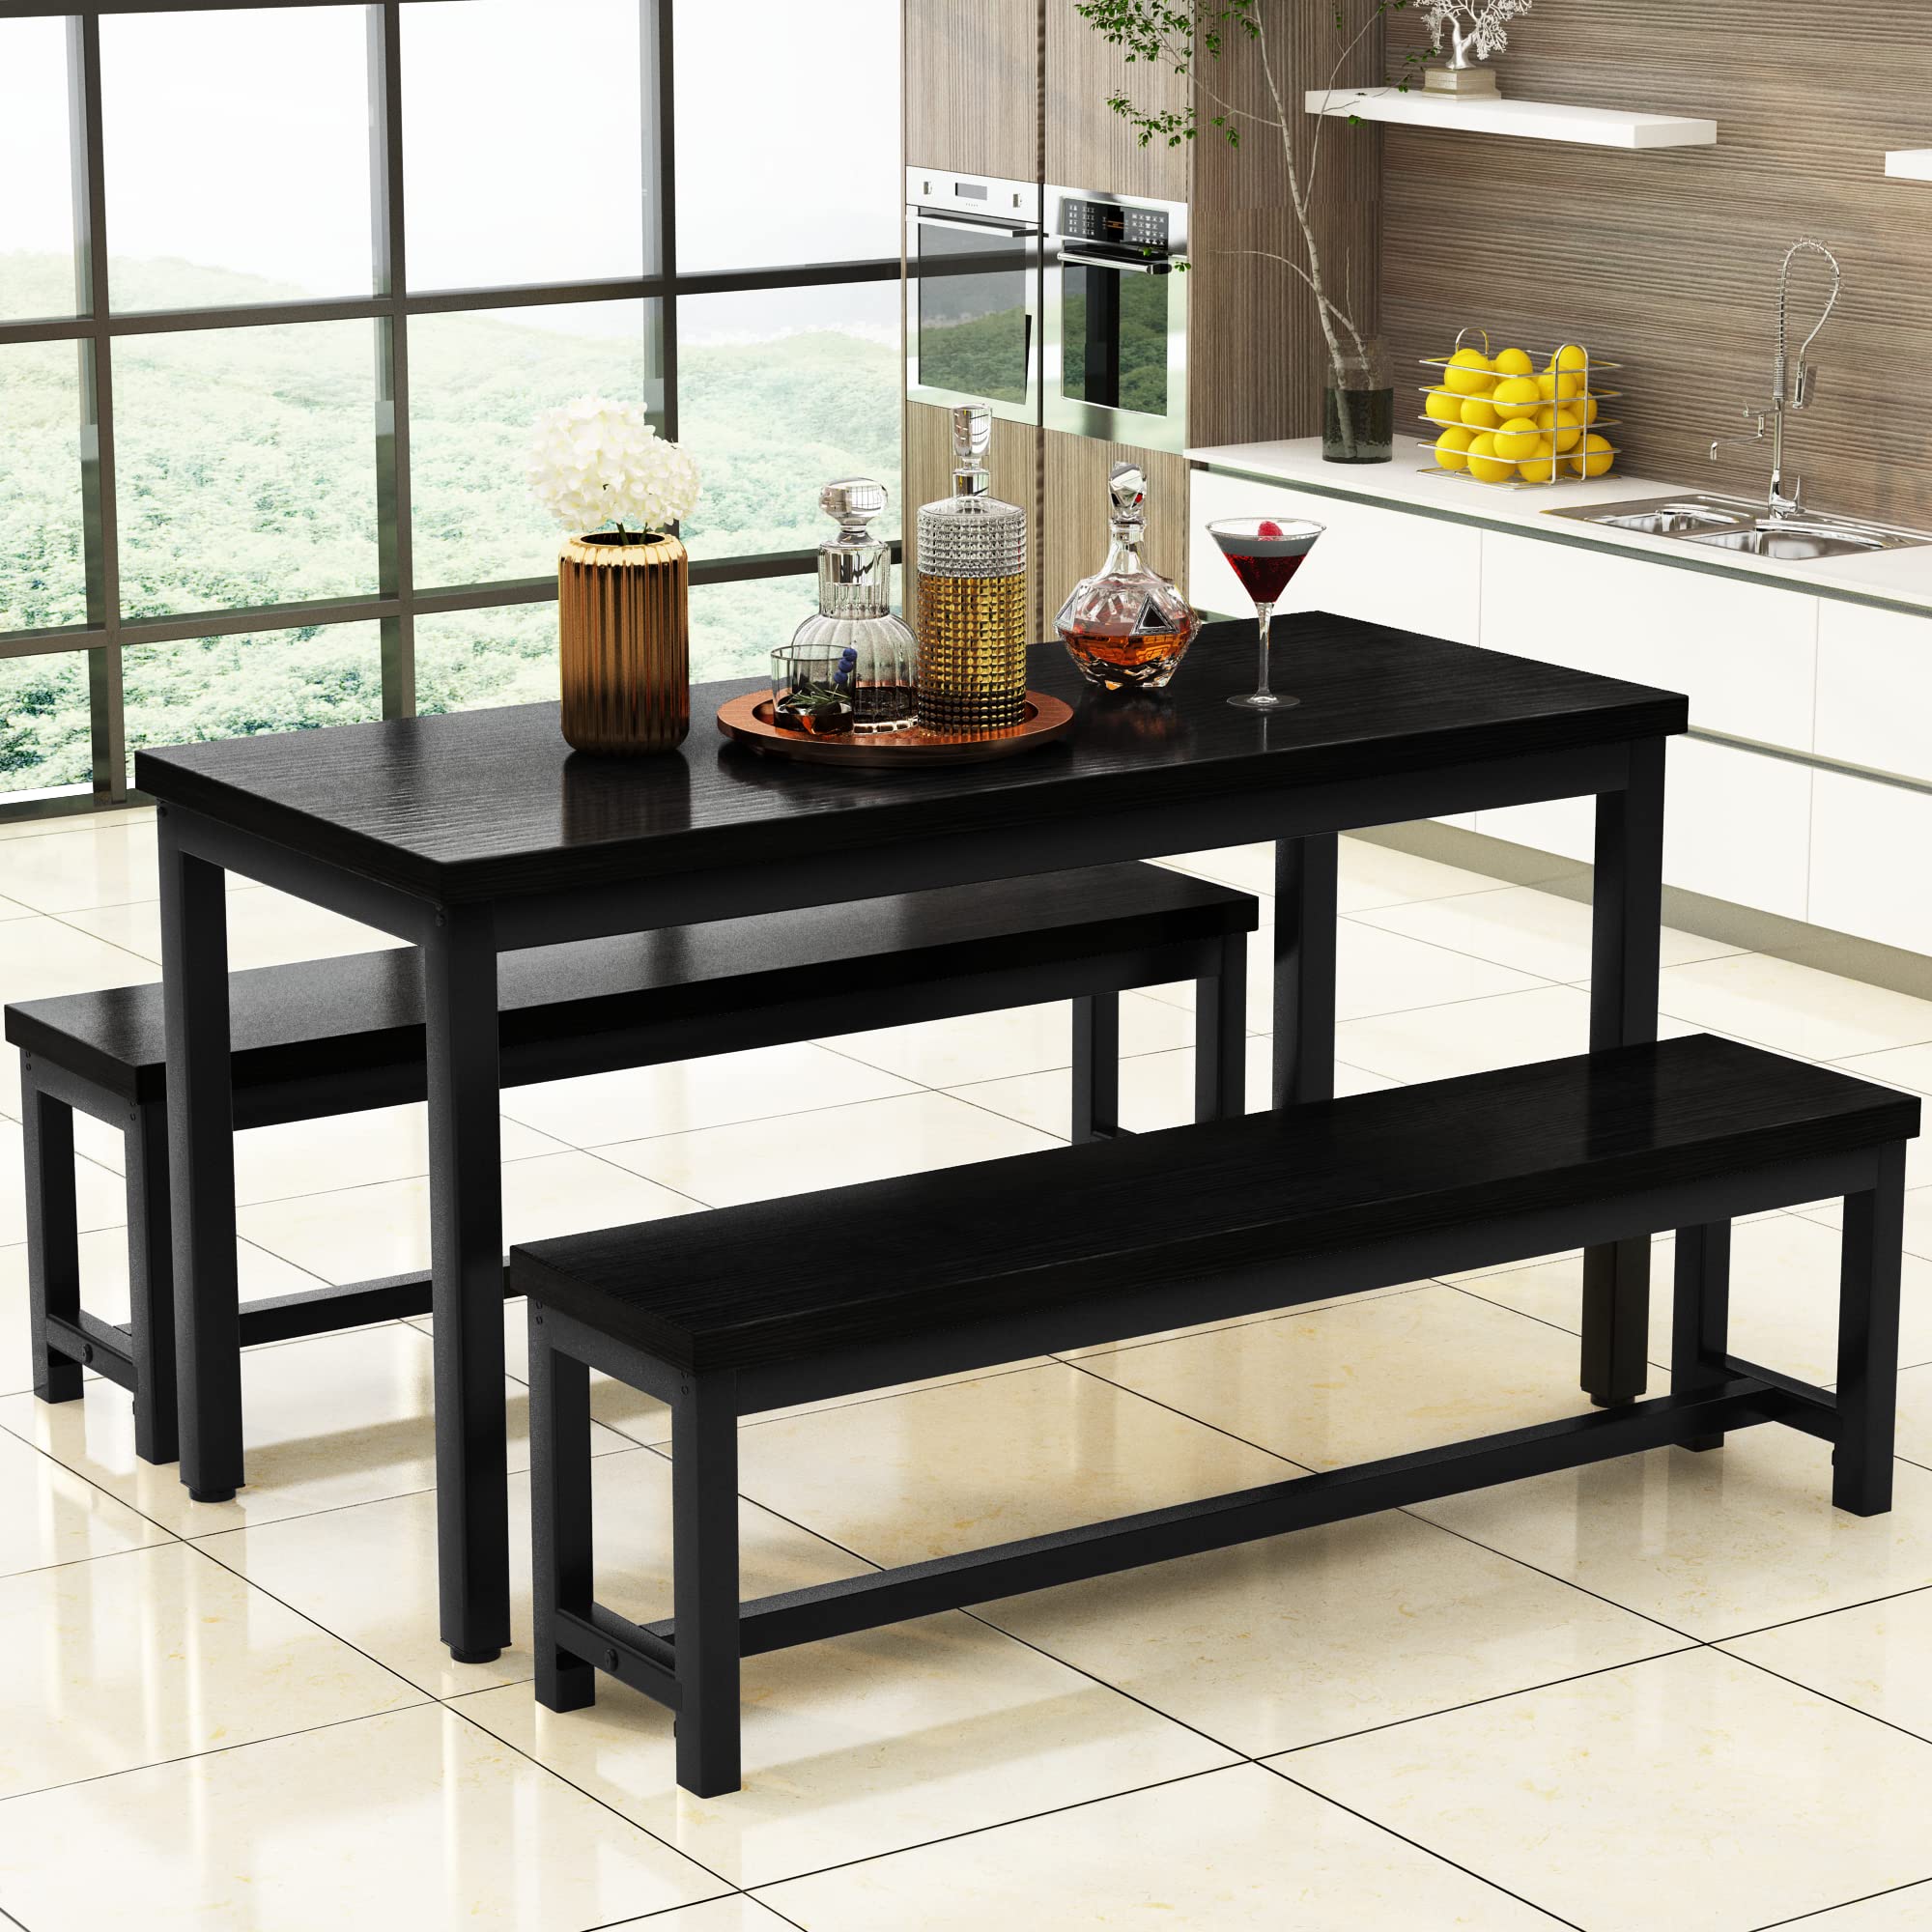 AWQM Dining Room Table Set, Kitchen Set with 2 Benches, Ideal for Home, and Room, Breakfast of 43.3x23.6x28.5 inches, Benches 38.5x11.8x17.5 Black